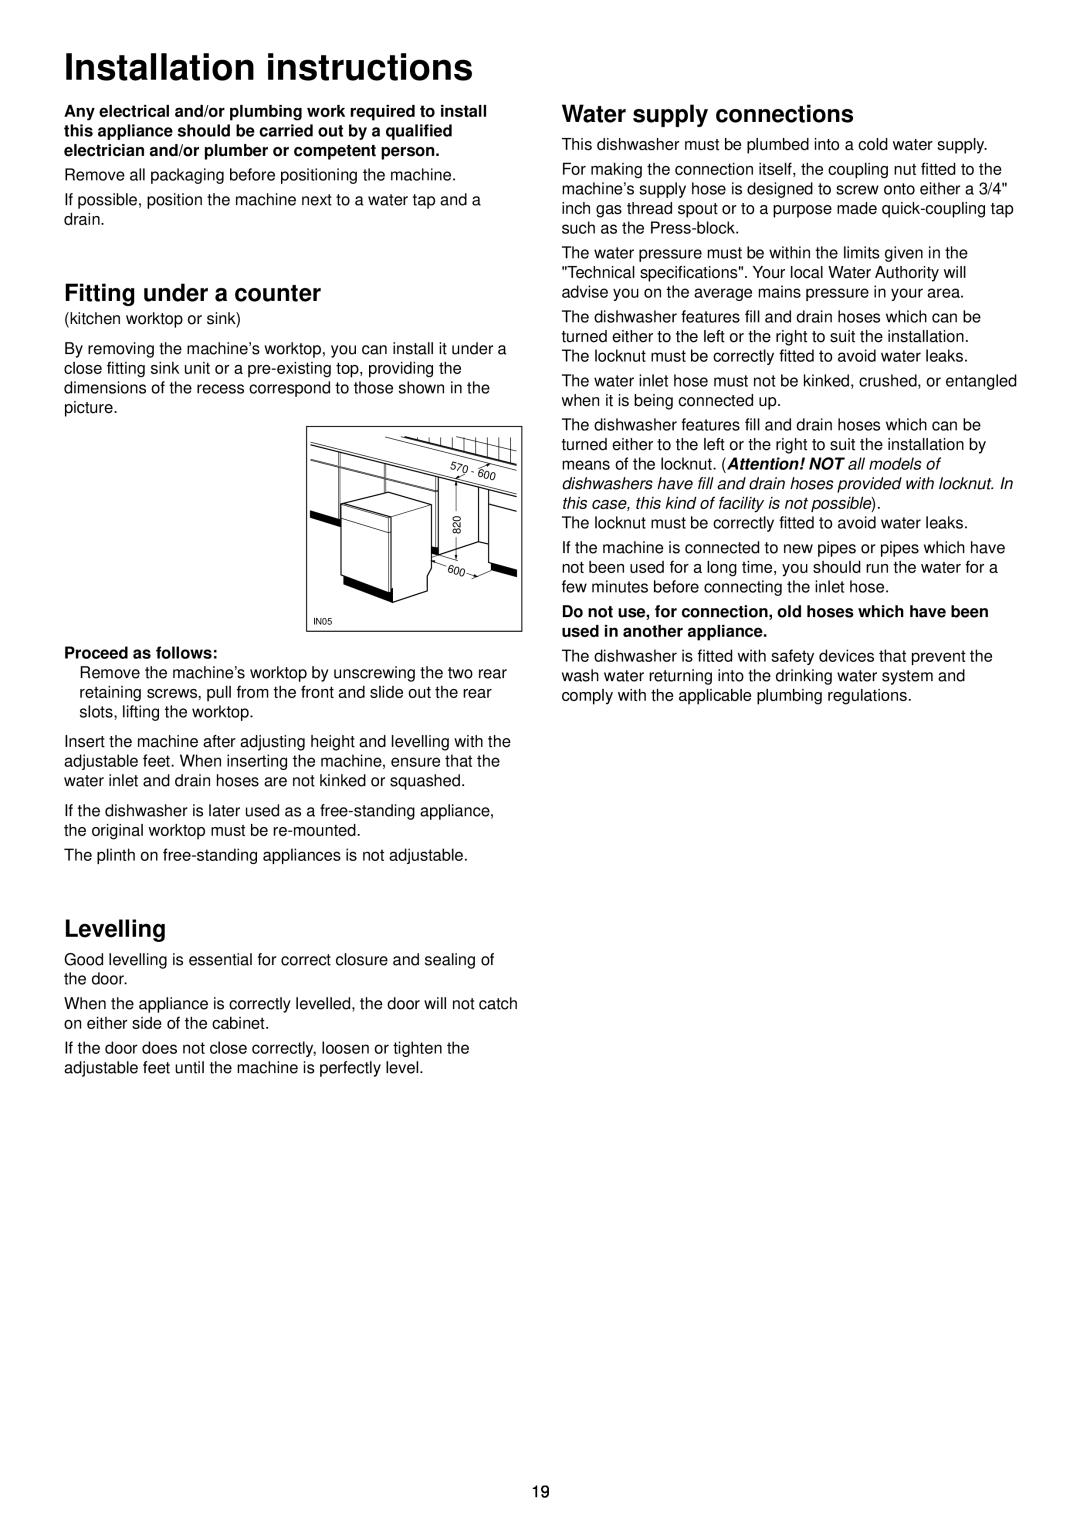 Zanussi DE 6754 S manual Installation instructions, Fitting under a counter, Levelling, Water supply connections 